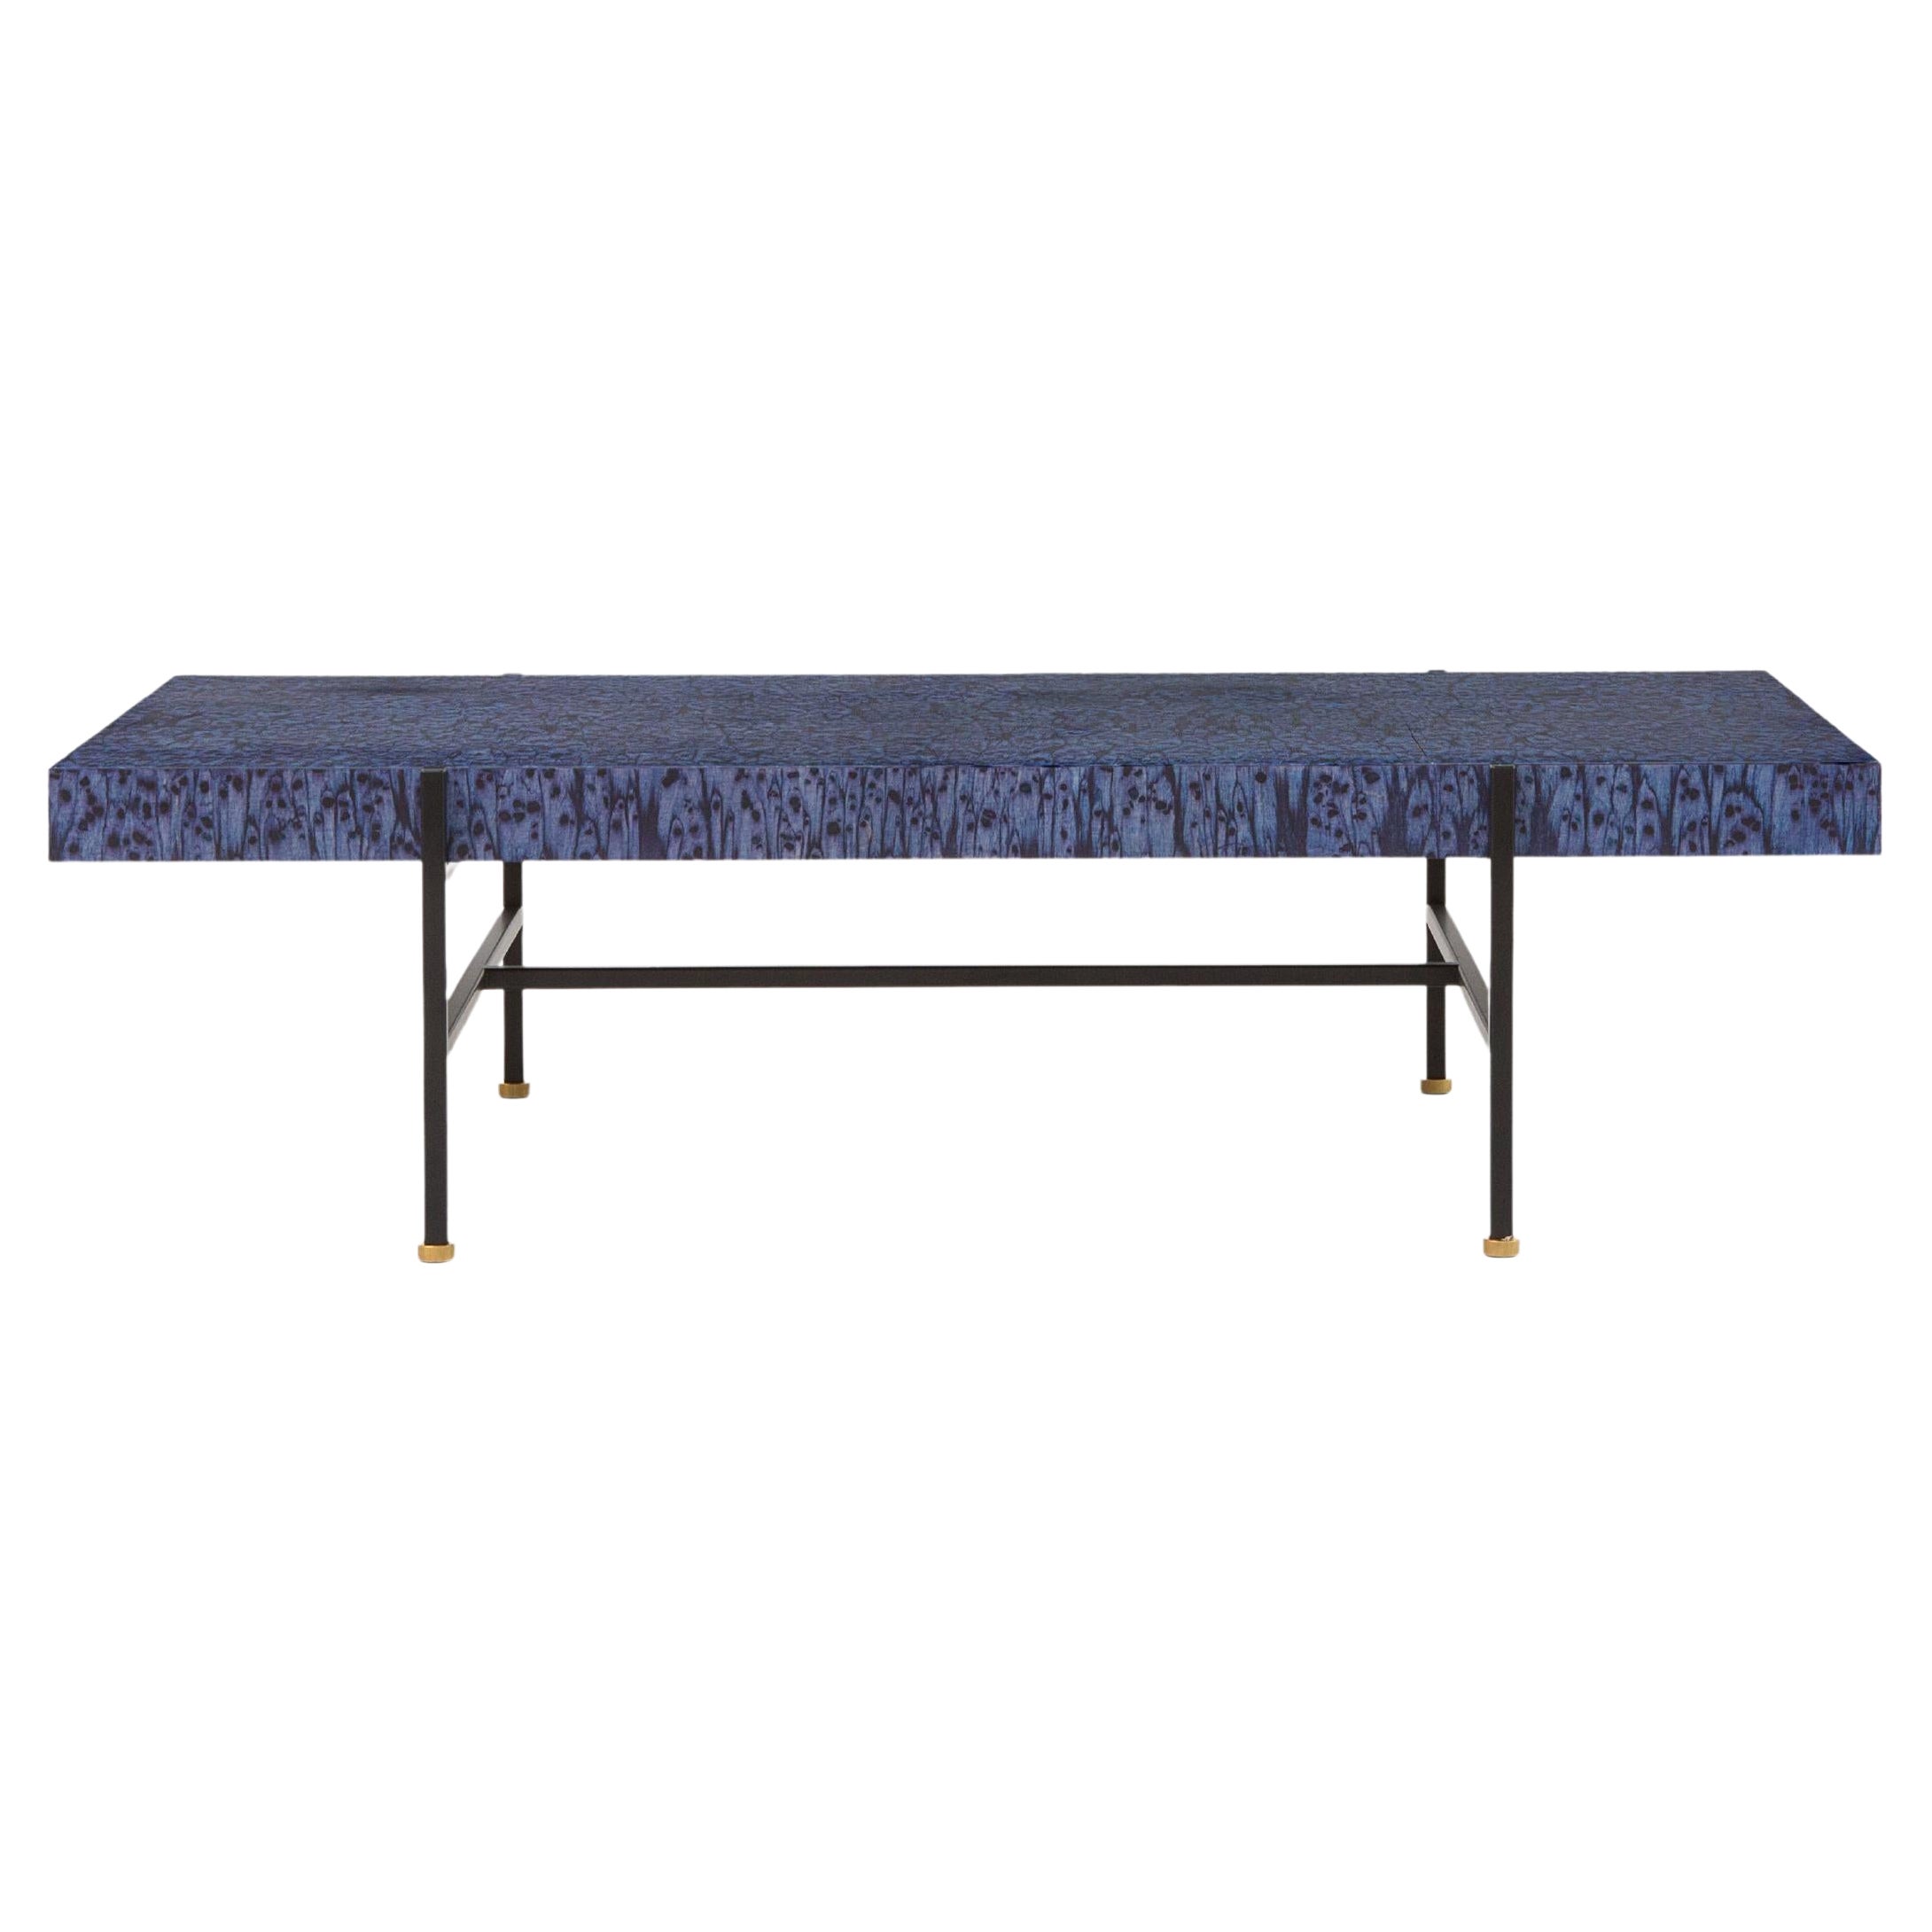 Purple Osis Bensimon Low Table by Llot Llov